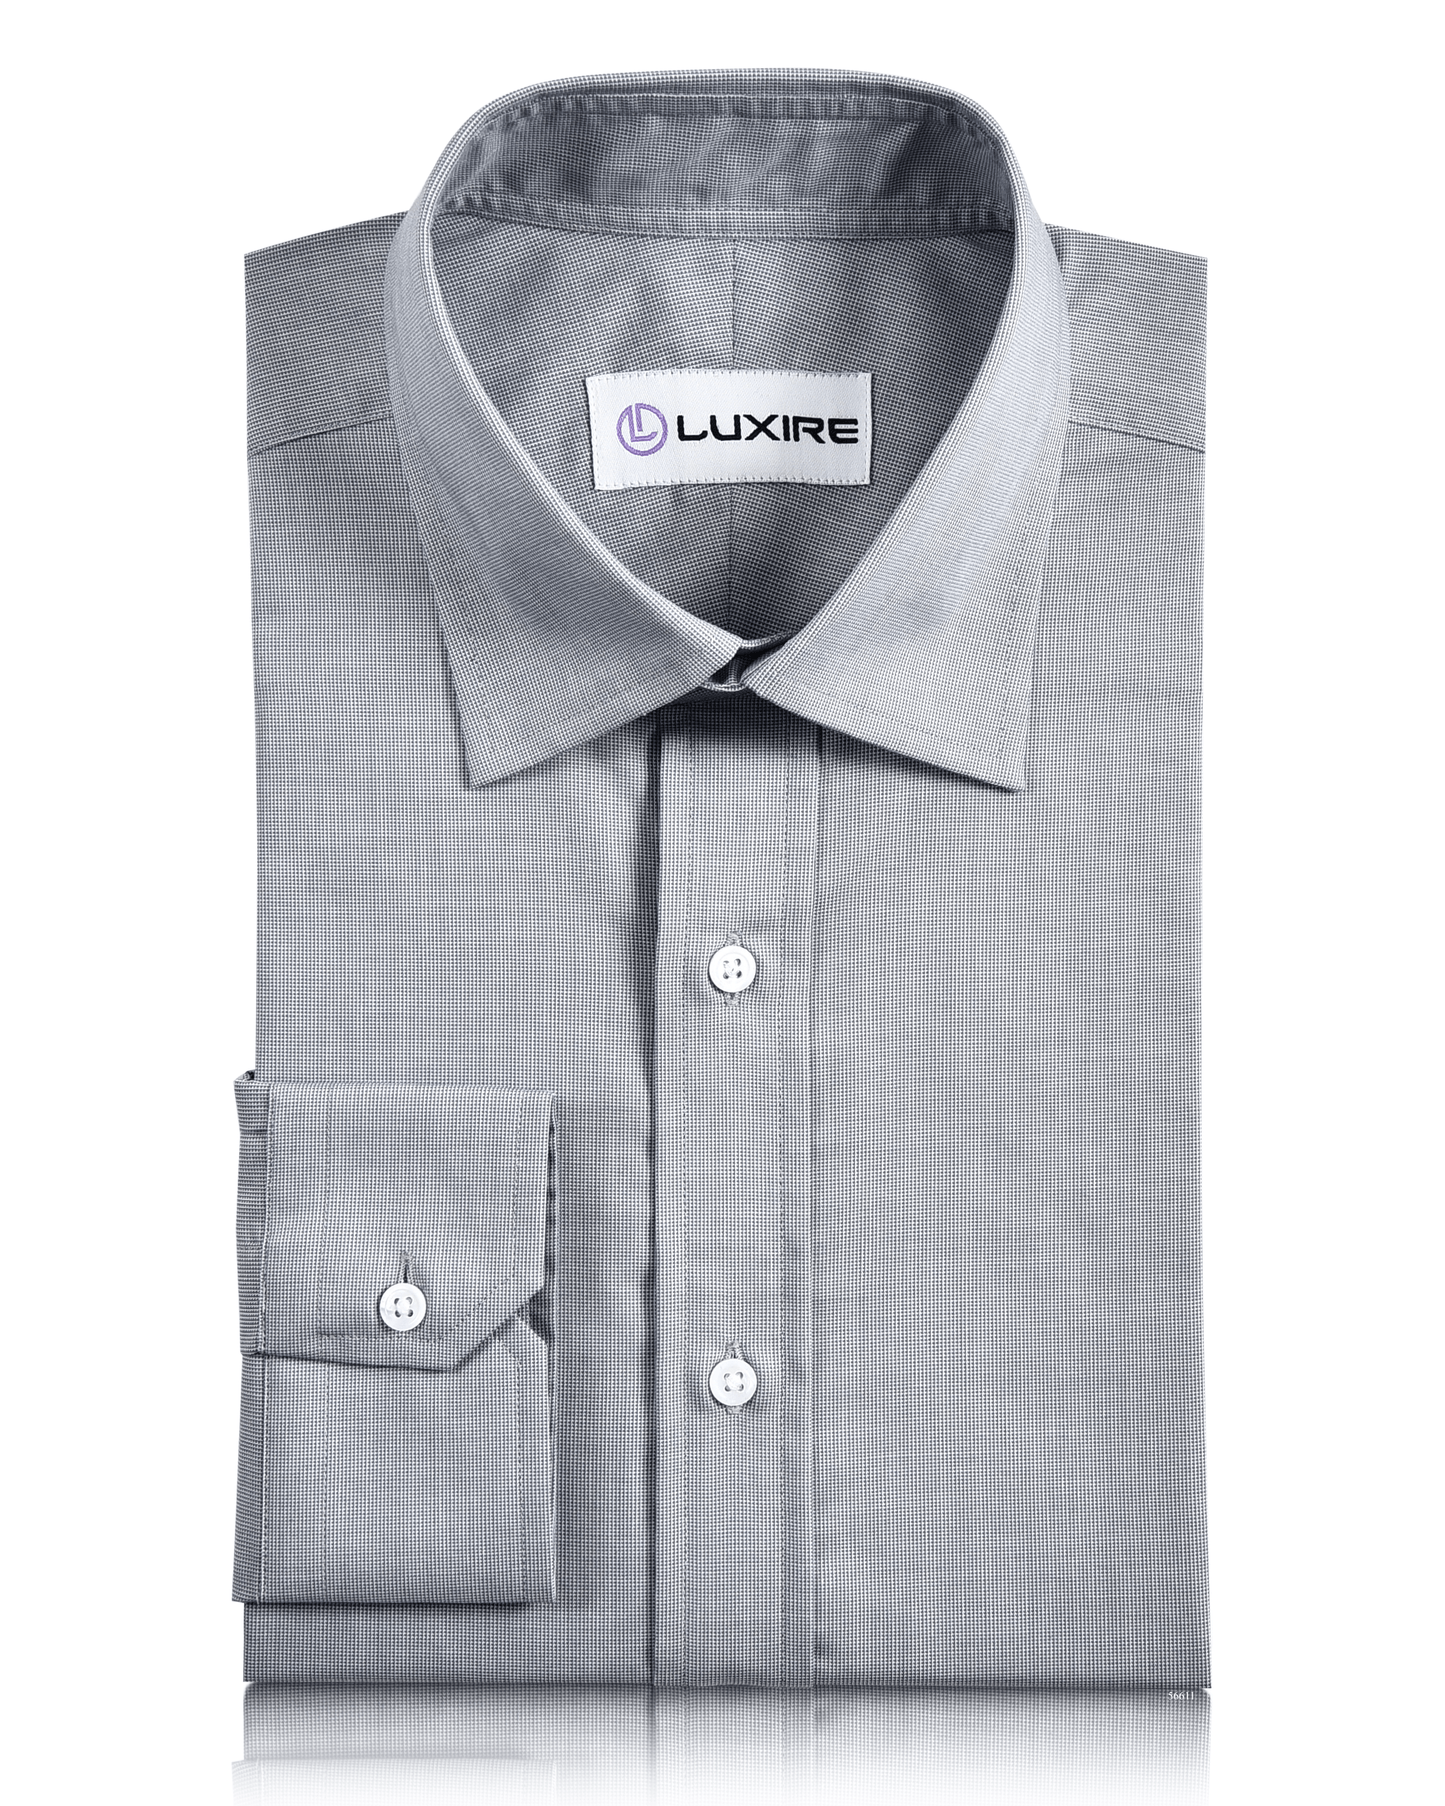 Front view of custom check shirts for men by Luxire grey mini checks